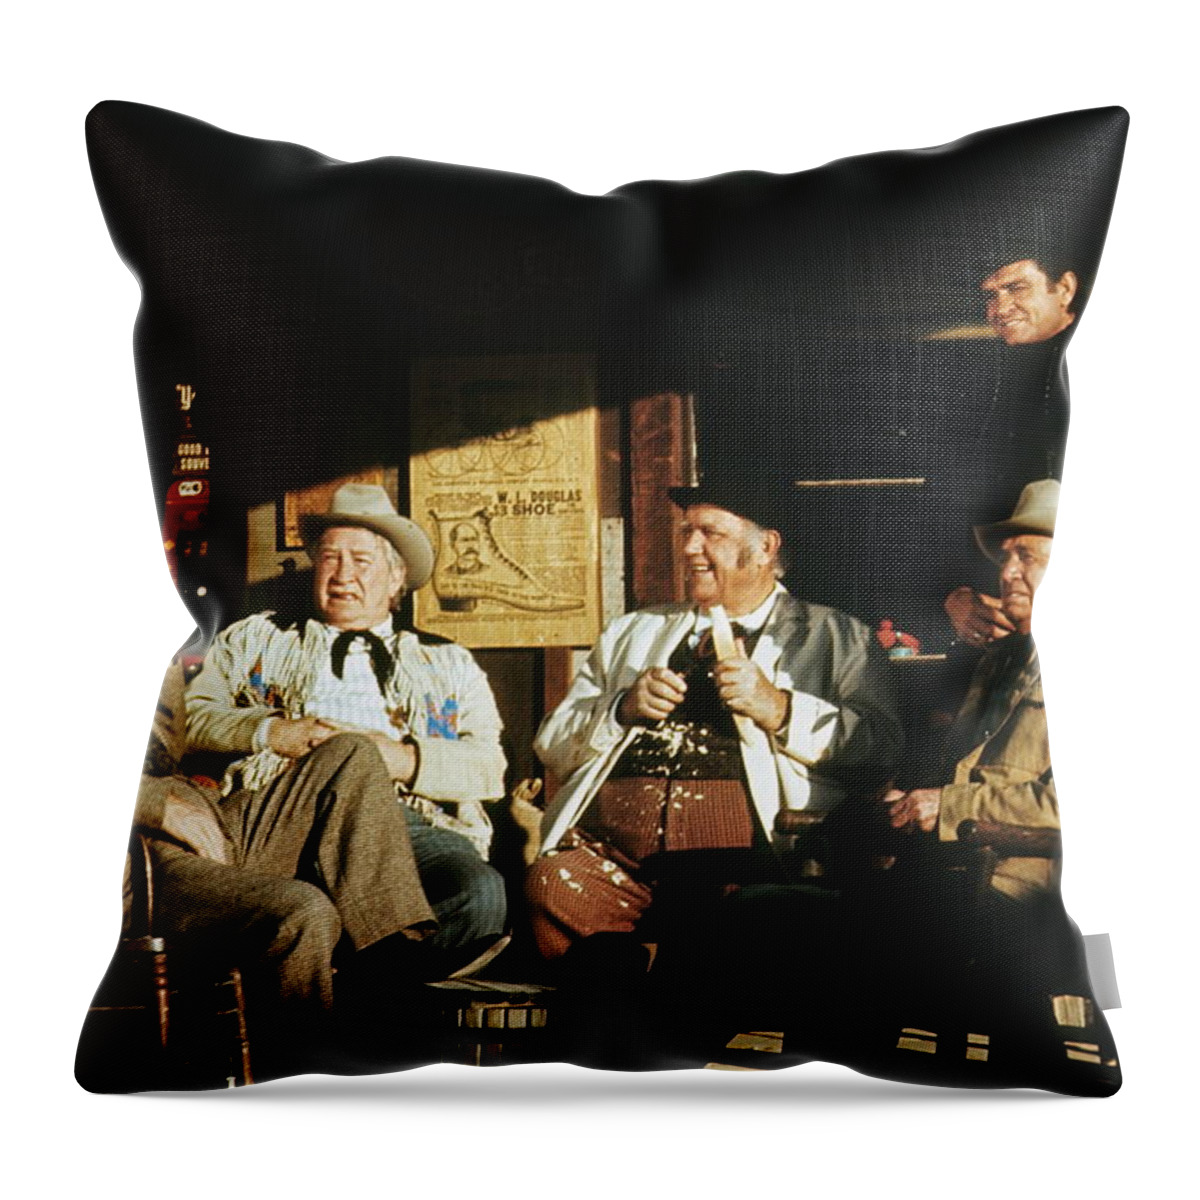 The Over The Hill Gang Johnny Cash Porch Old Tucson Arizona 1971 Throw Pillow featuring the photograph The Over The Hill Gang Johnny Cash Porch Old Tucson Arizona 1971 #5 by David Lee Guss